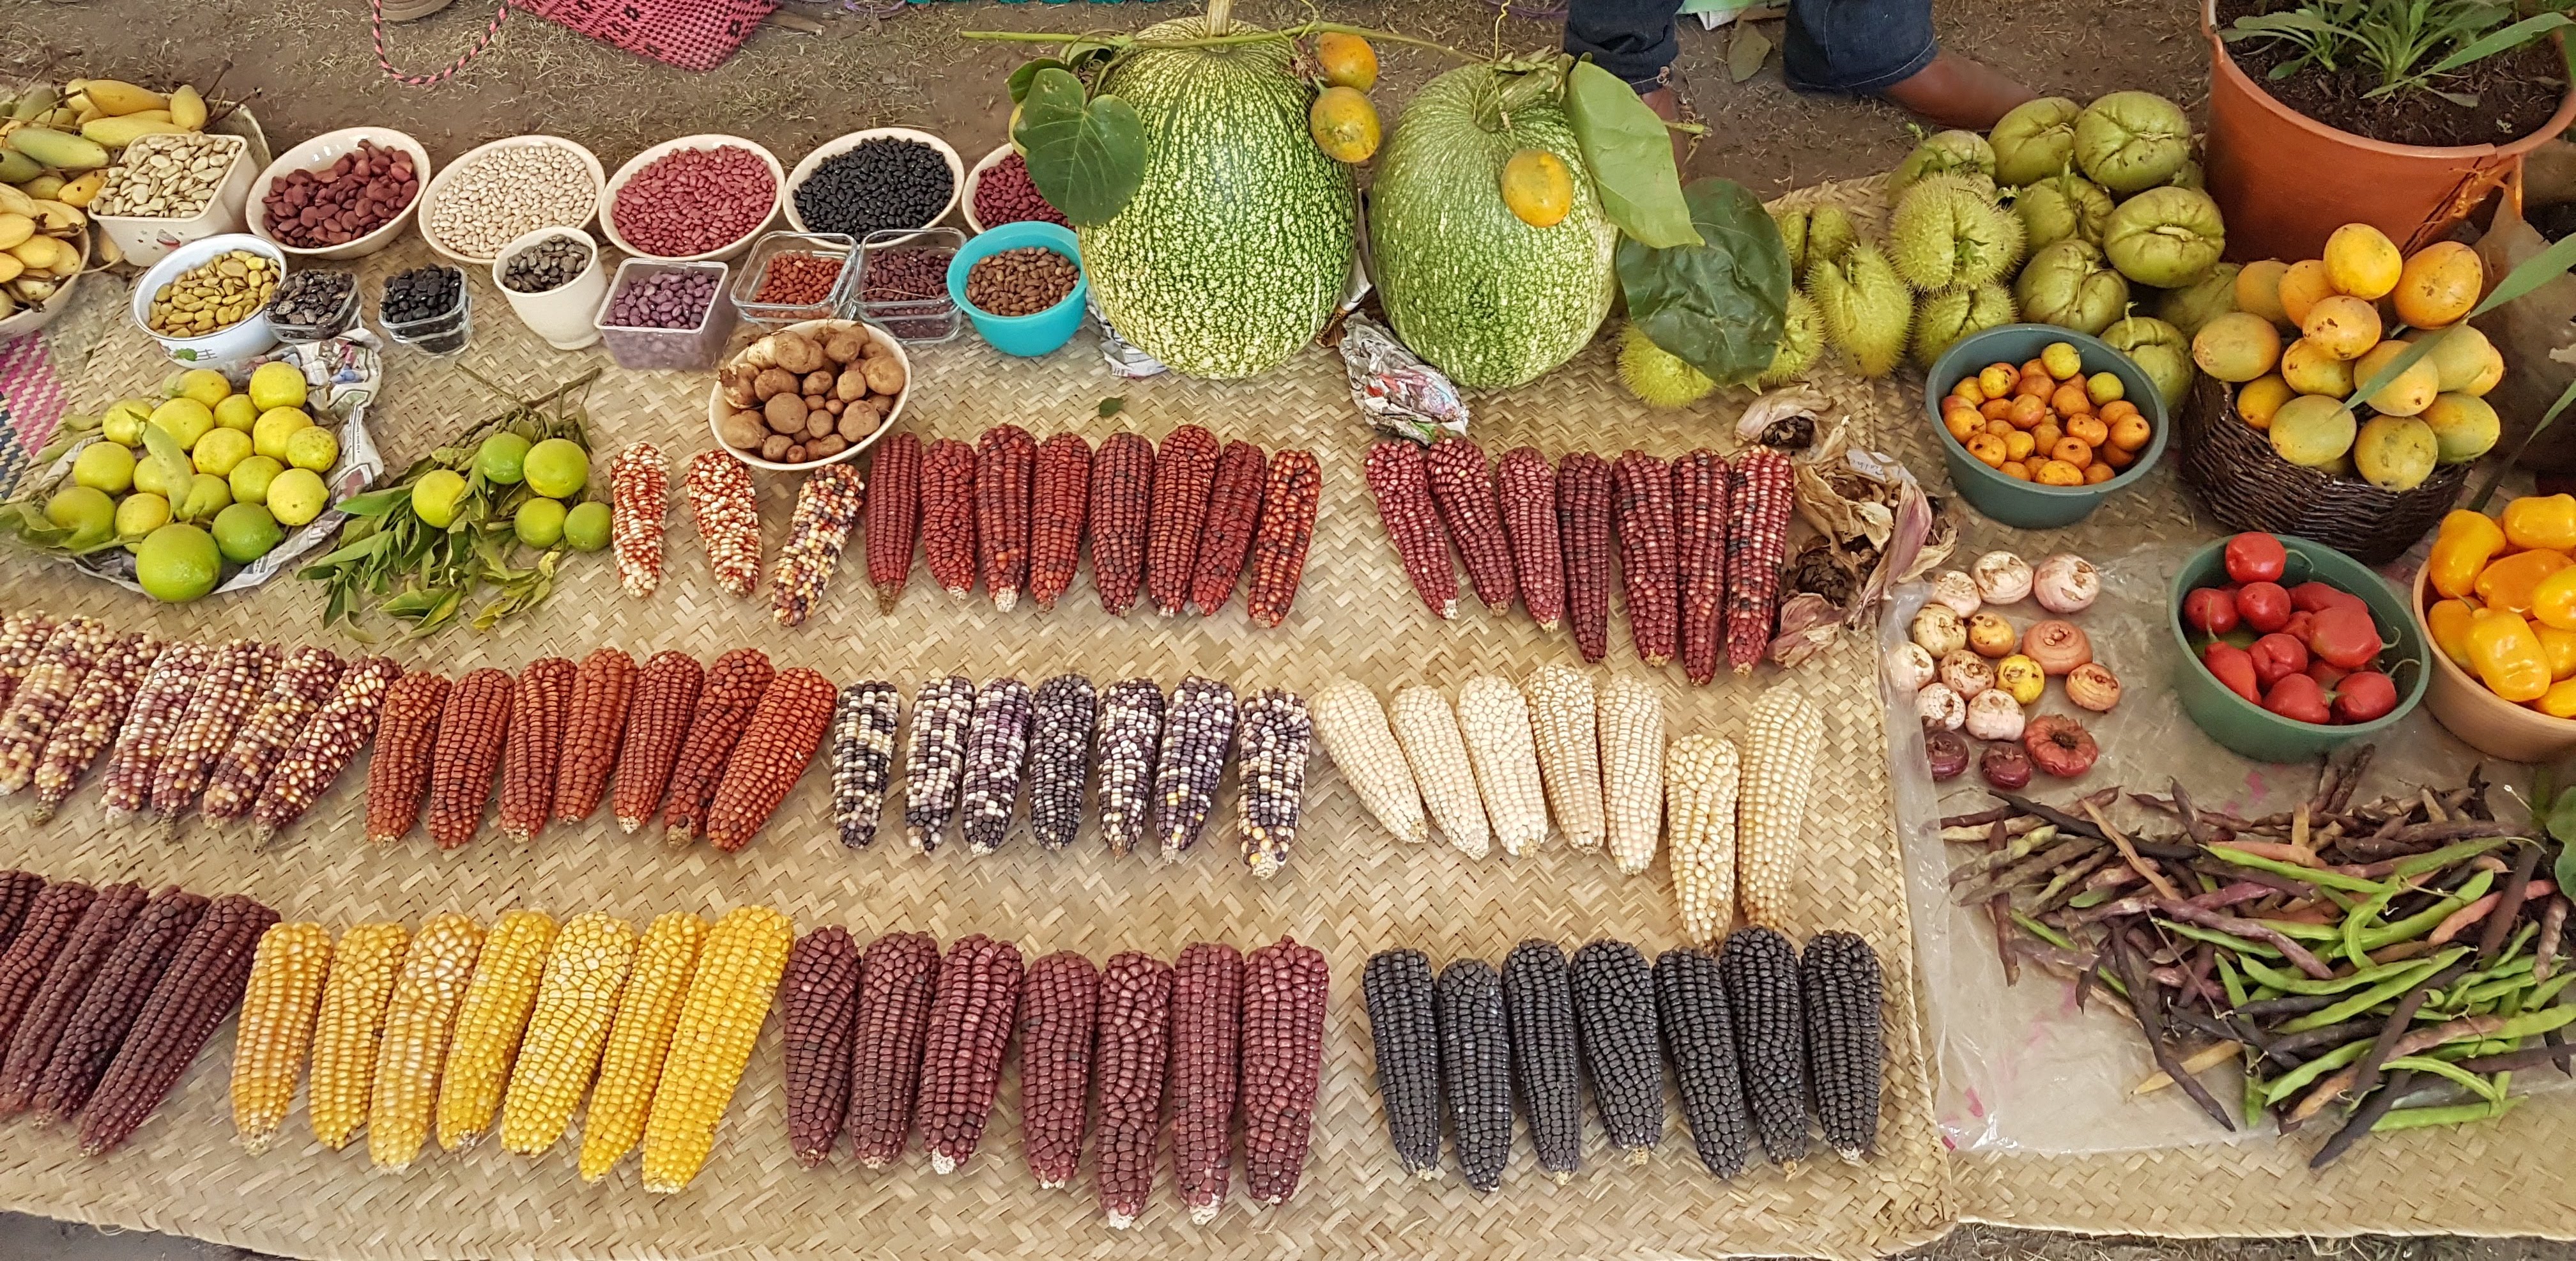 Traditional milpa products: native maize, beans, squash, chilies and other local fruits and vegetables. (Photo: Martha Willcox/CIMMYT)